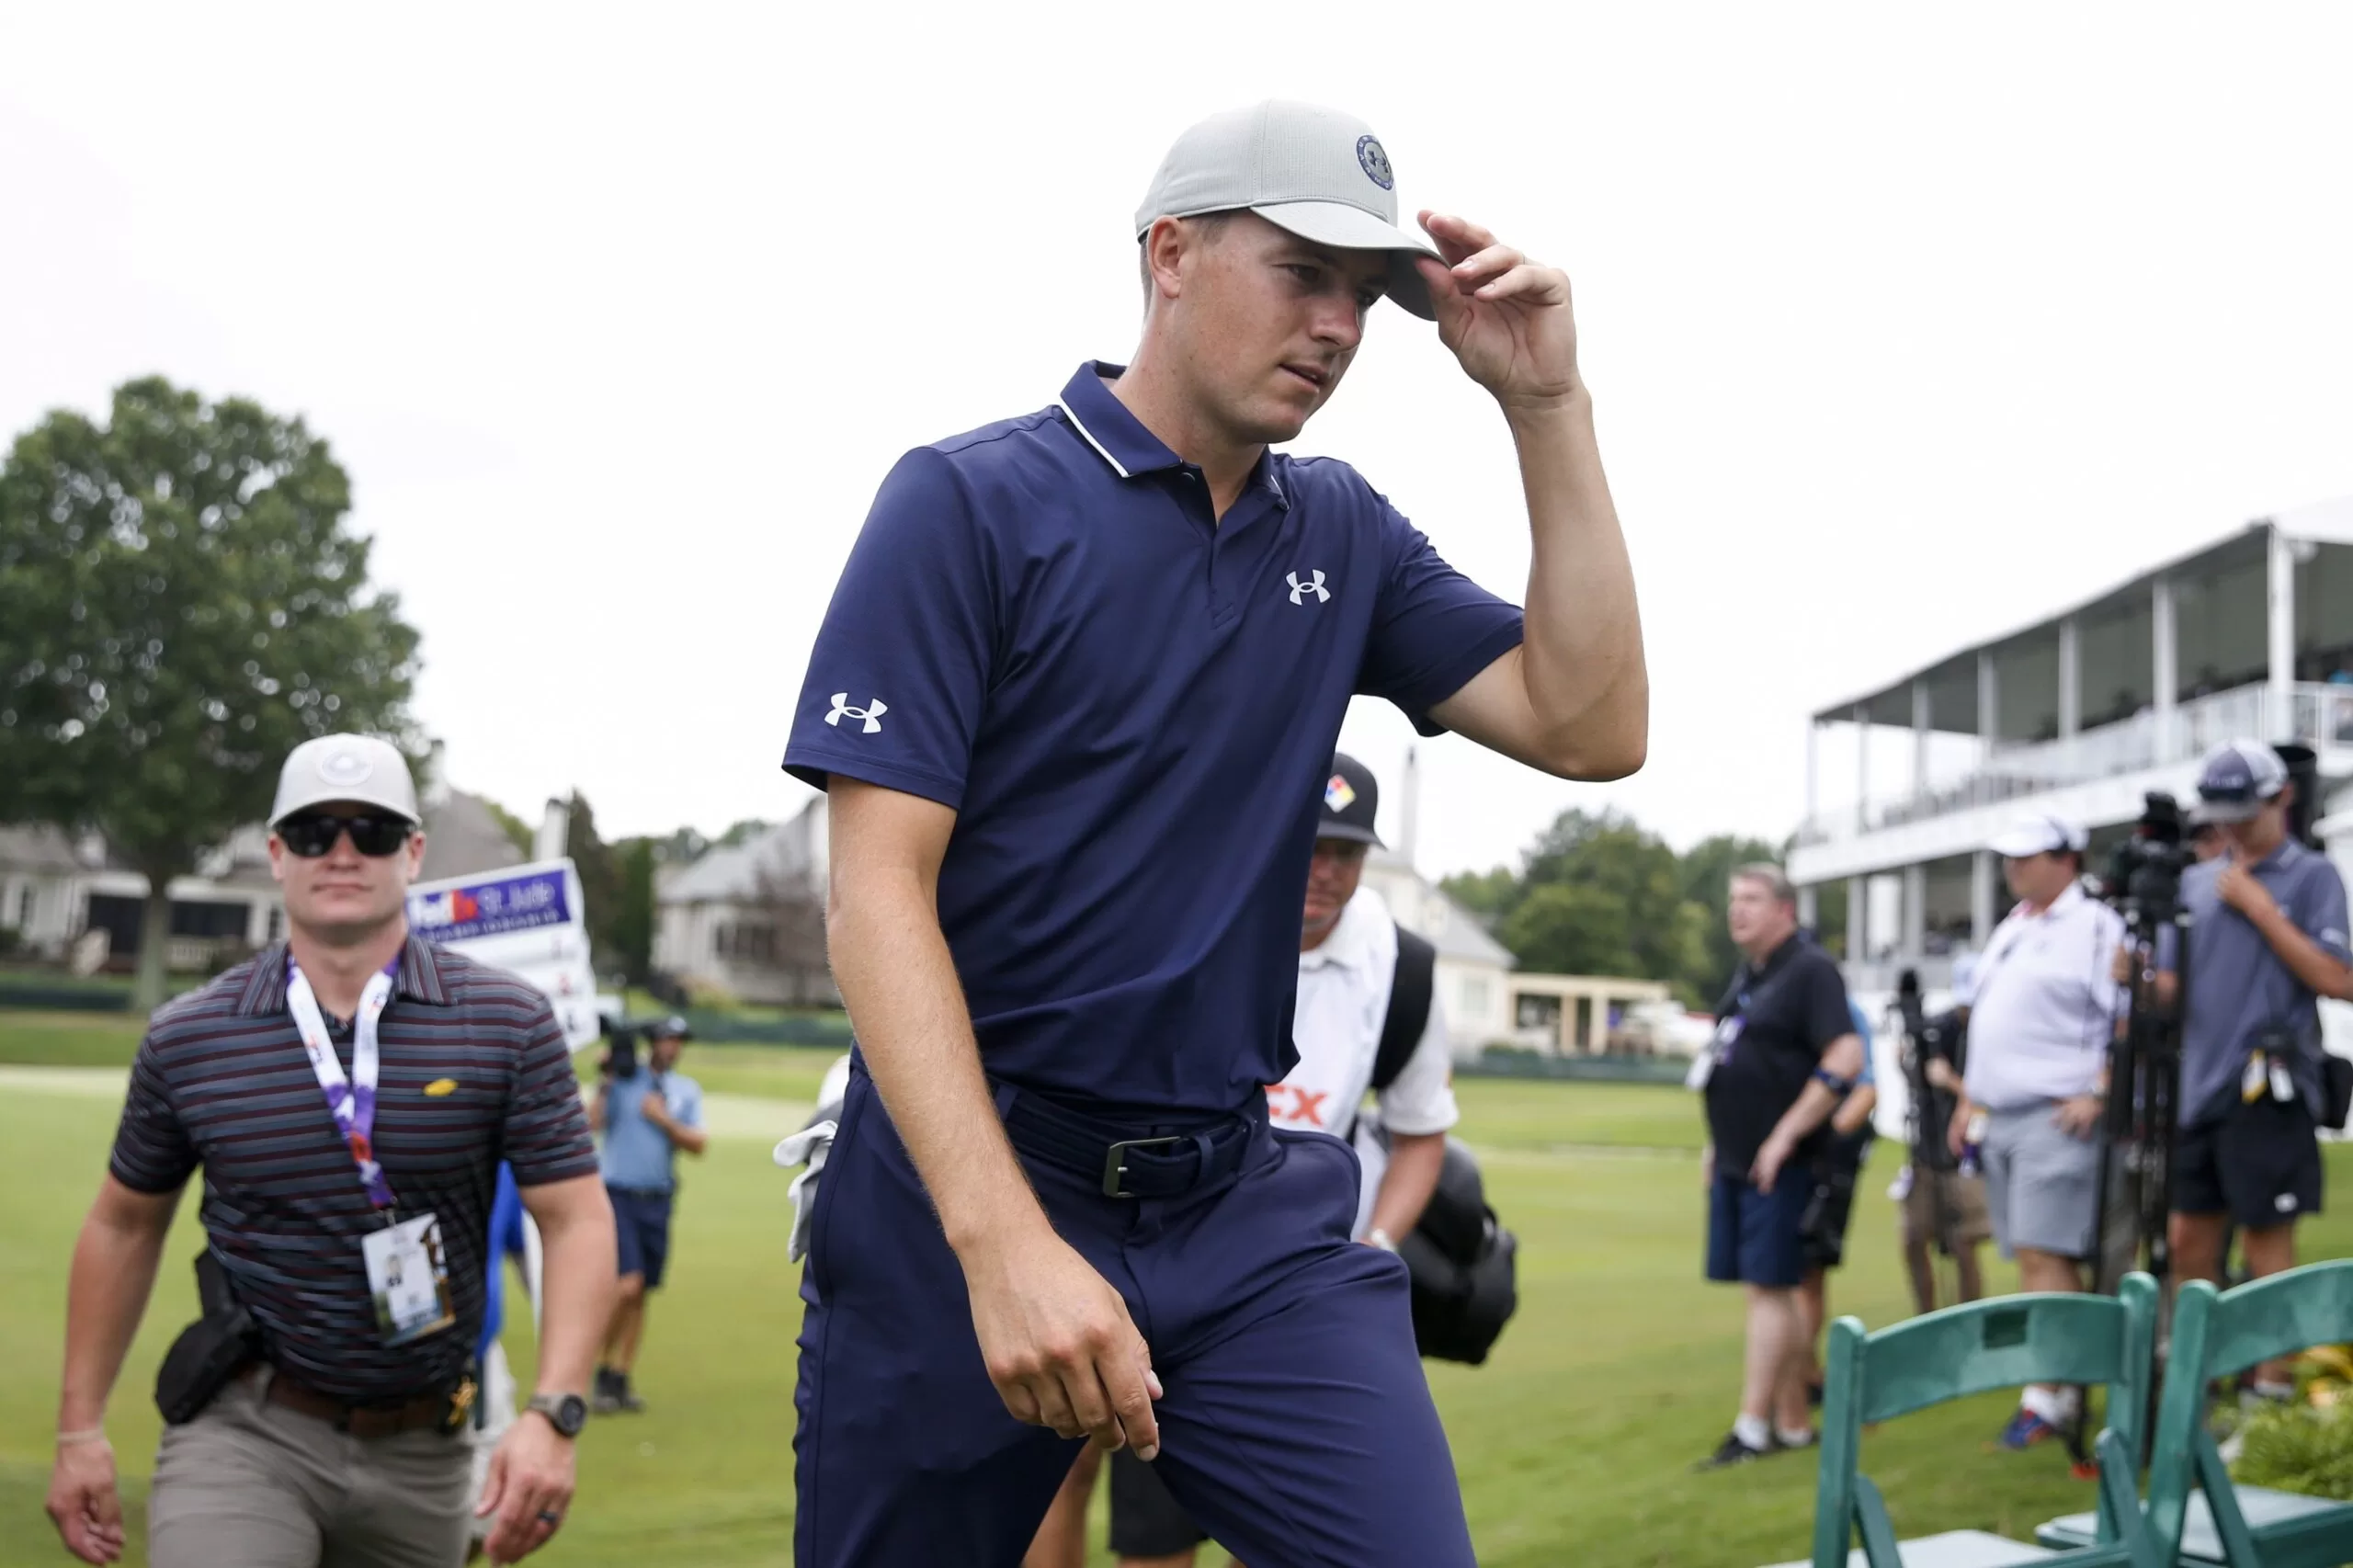 Jordan Spieth keeps a clean card in the mud for a 63 to lead the PGA Tour playoff opener
